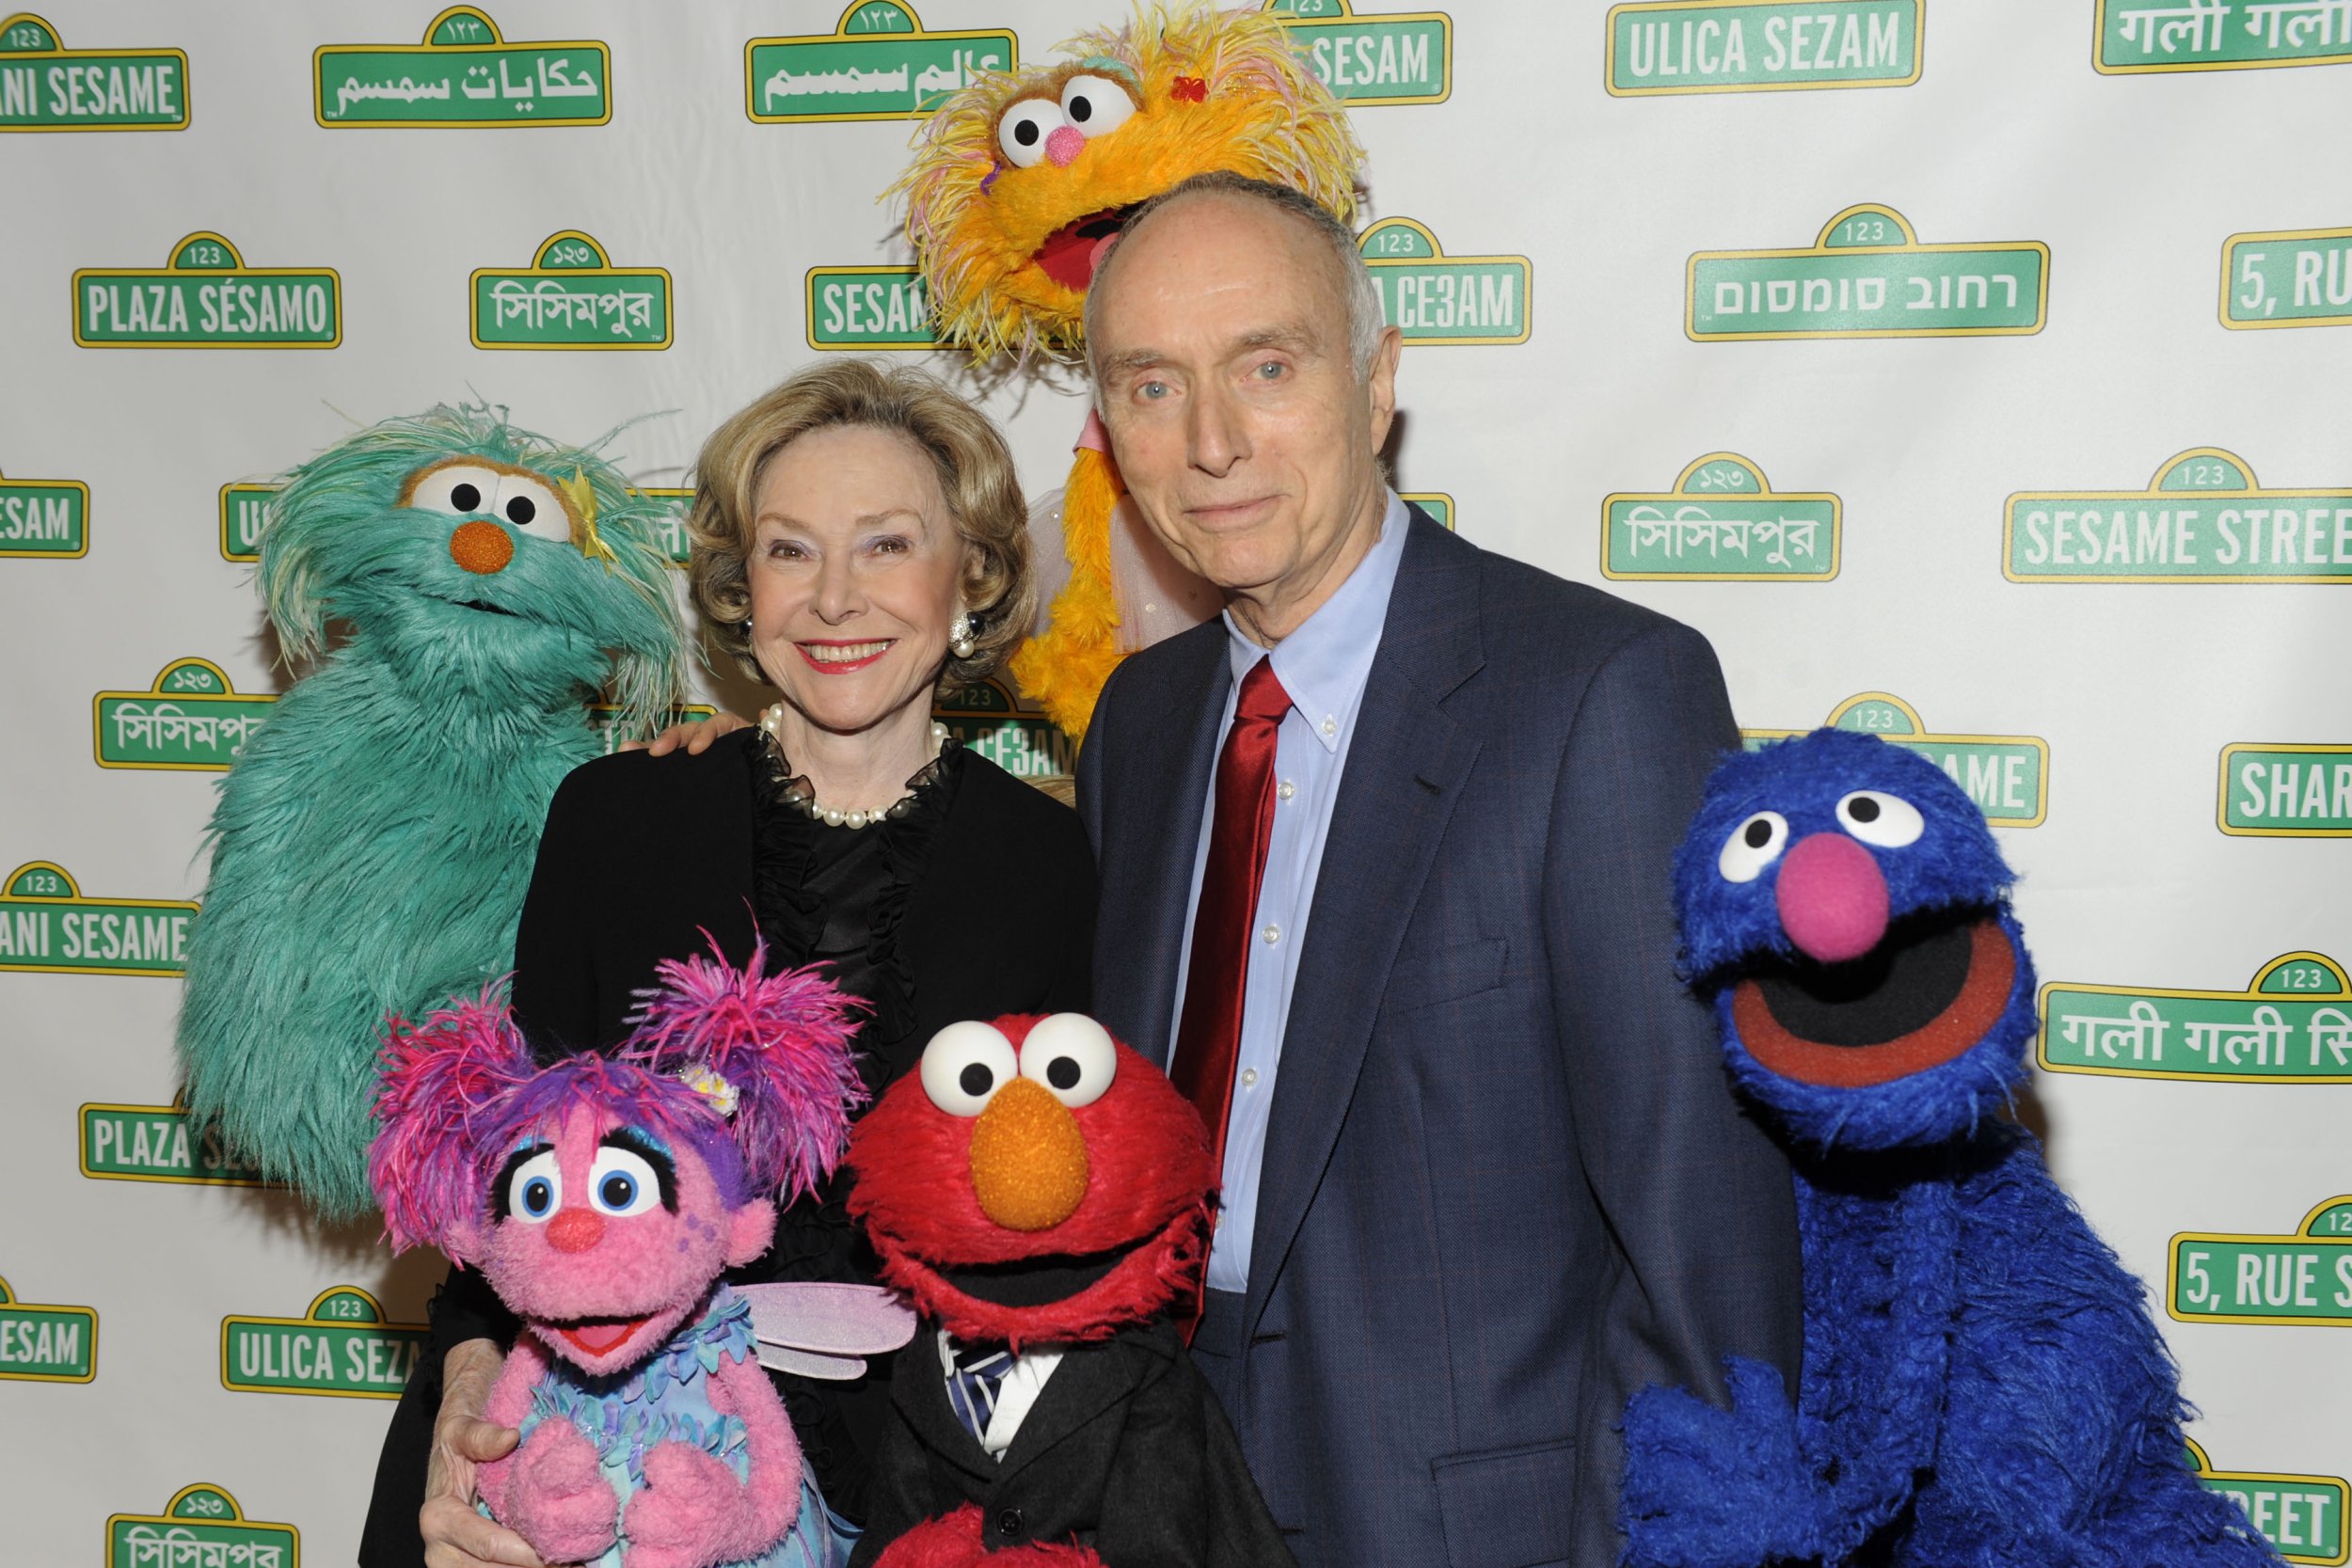 Joan Ganz Cooney, left, and Lloyd Morrisett, right, co-founded the Children's Television Workshop and co-created Sesame Street